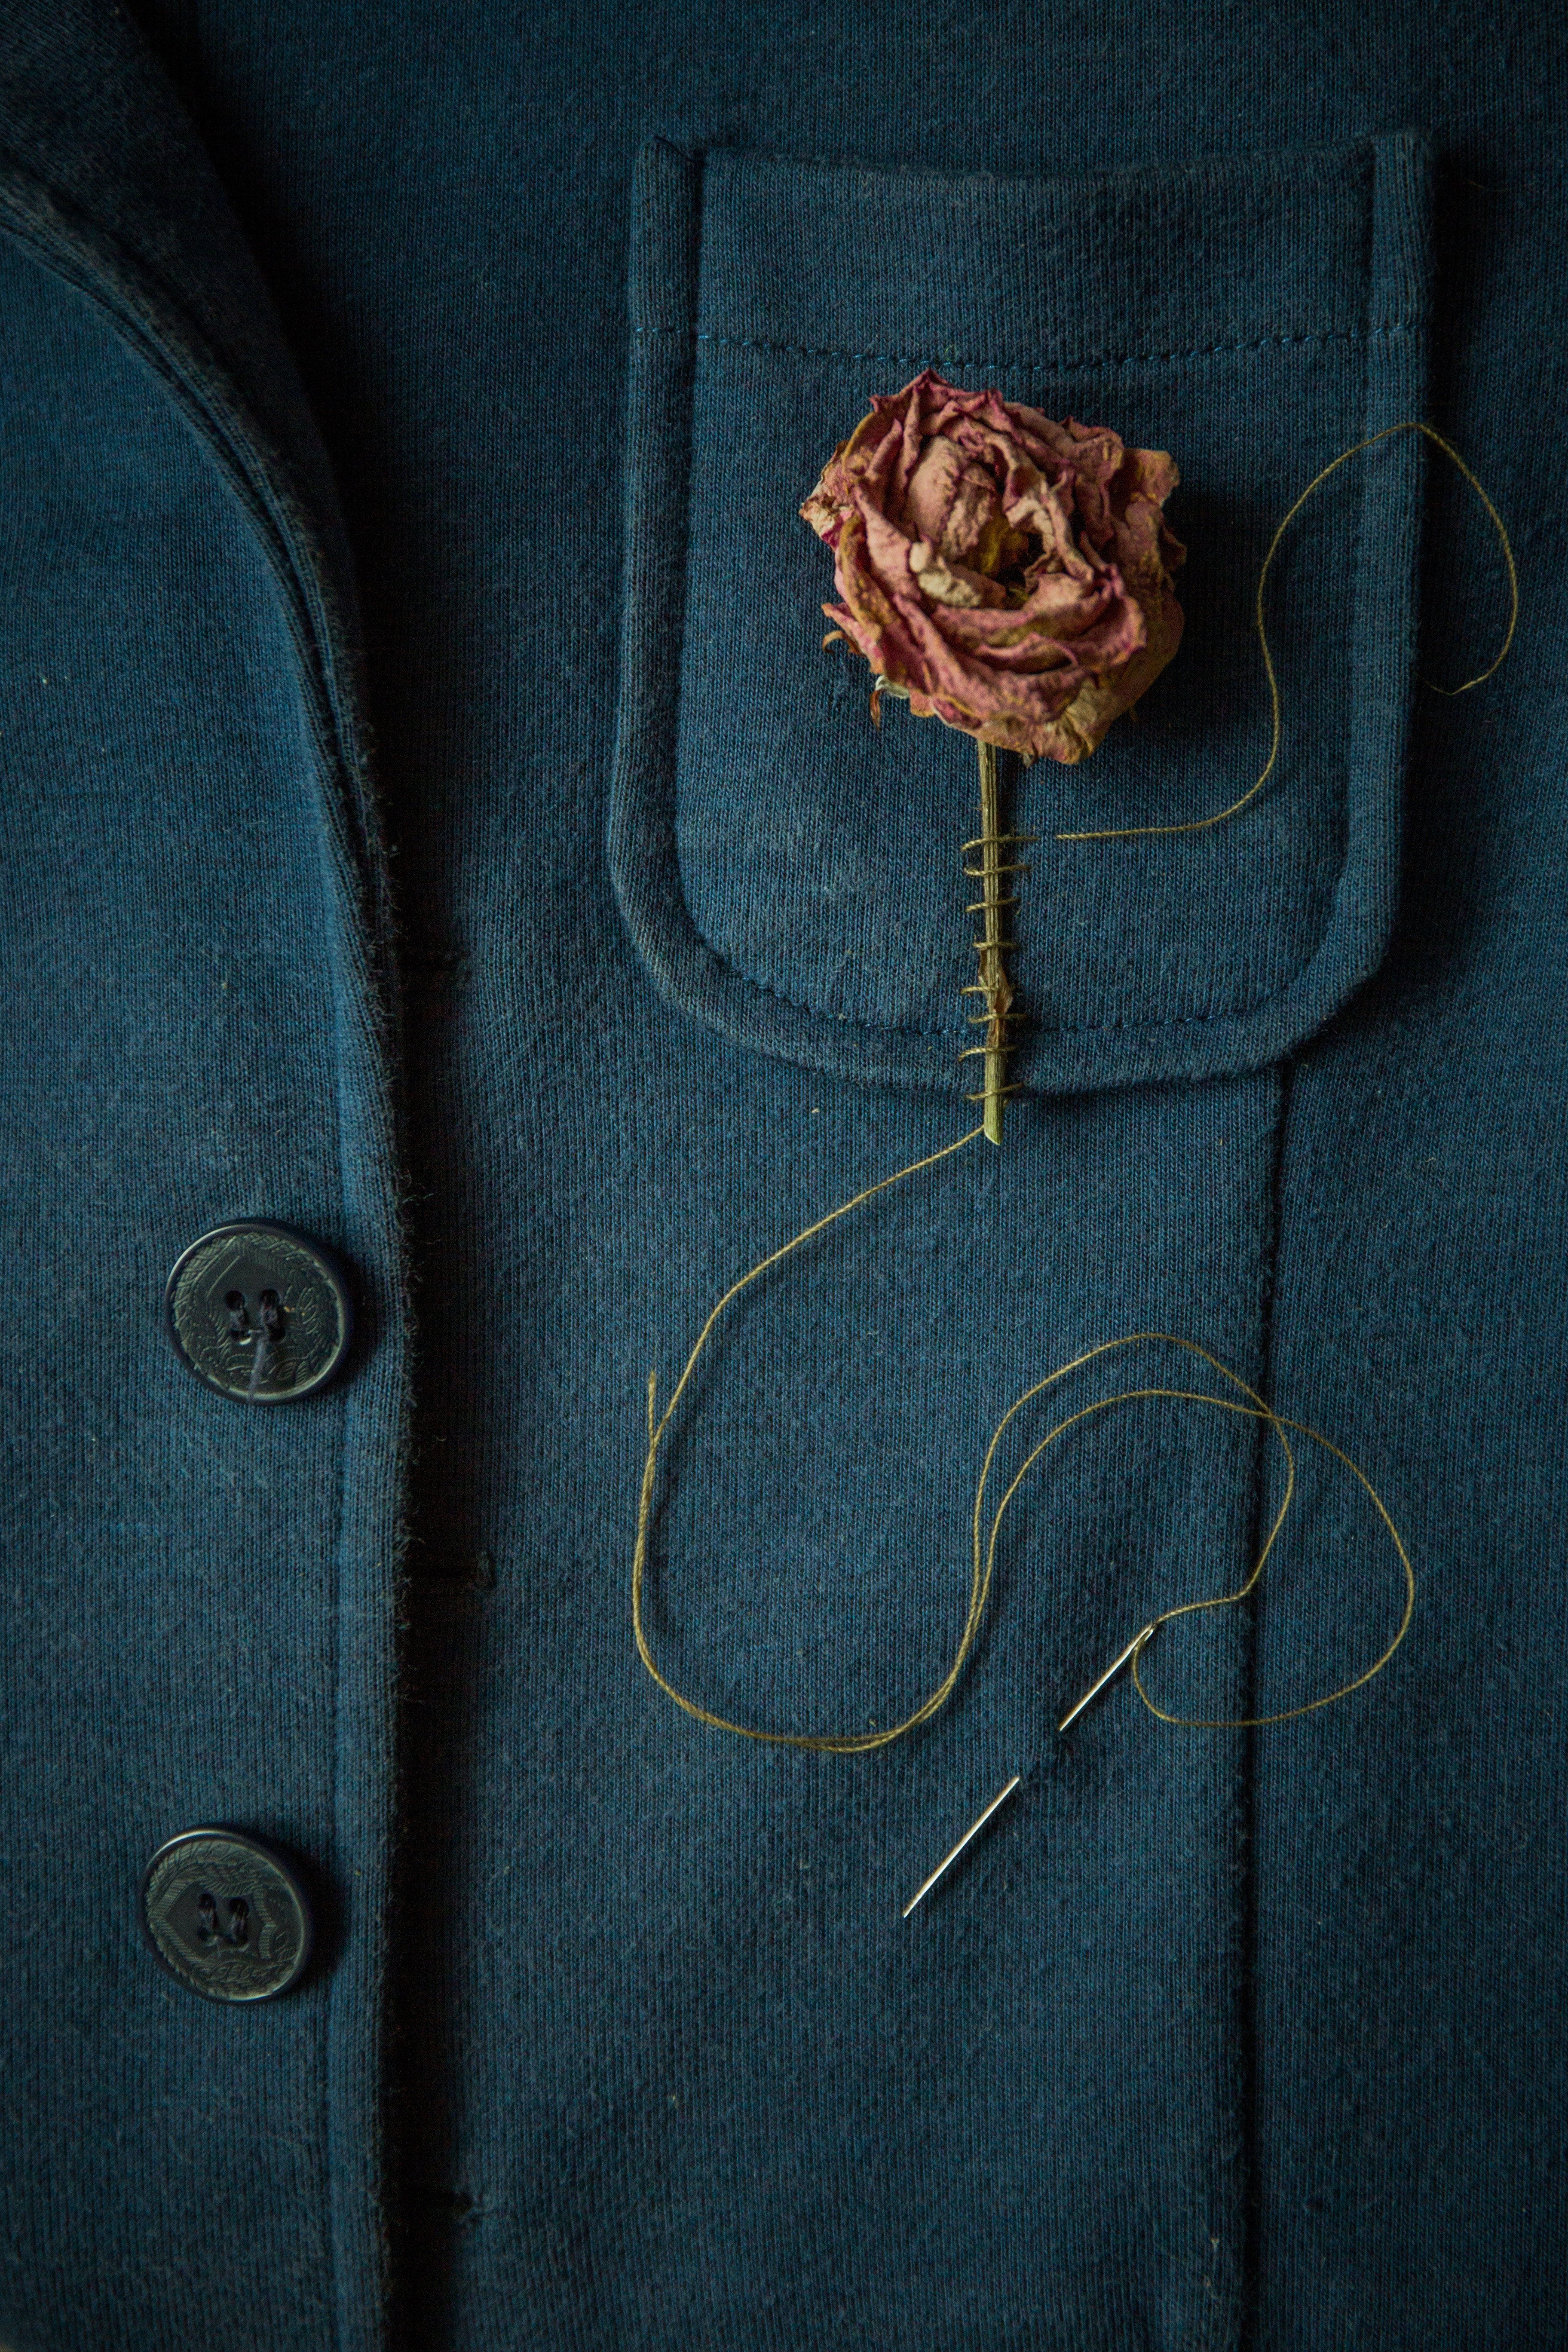 The pocket was oddly sewn onto the jacket. | Source: Pexels